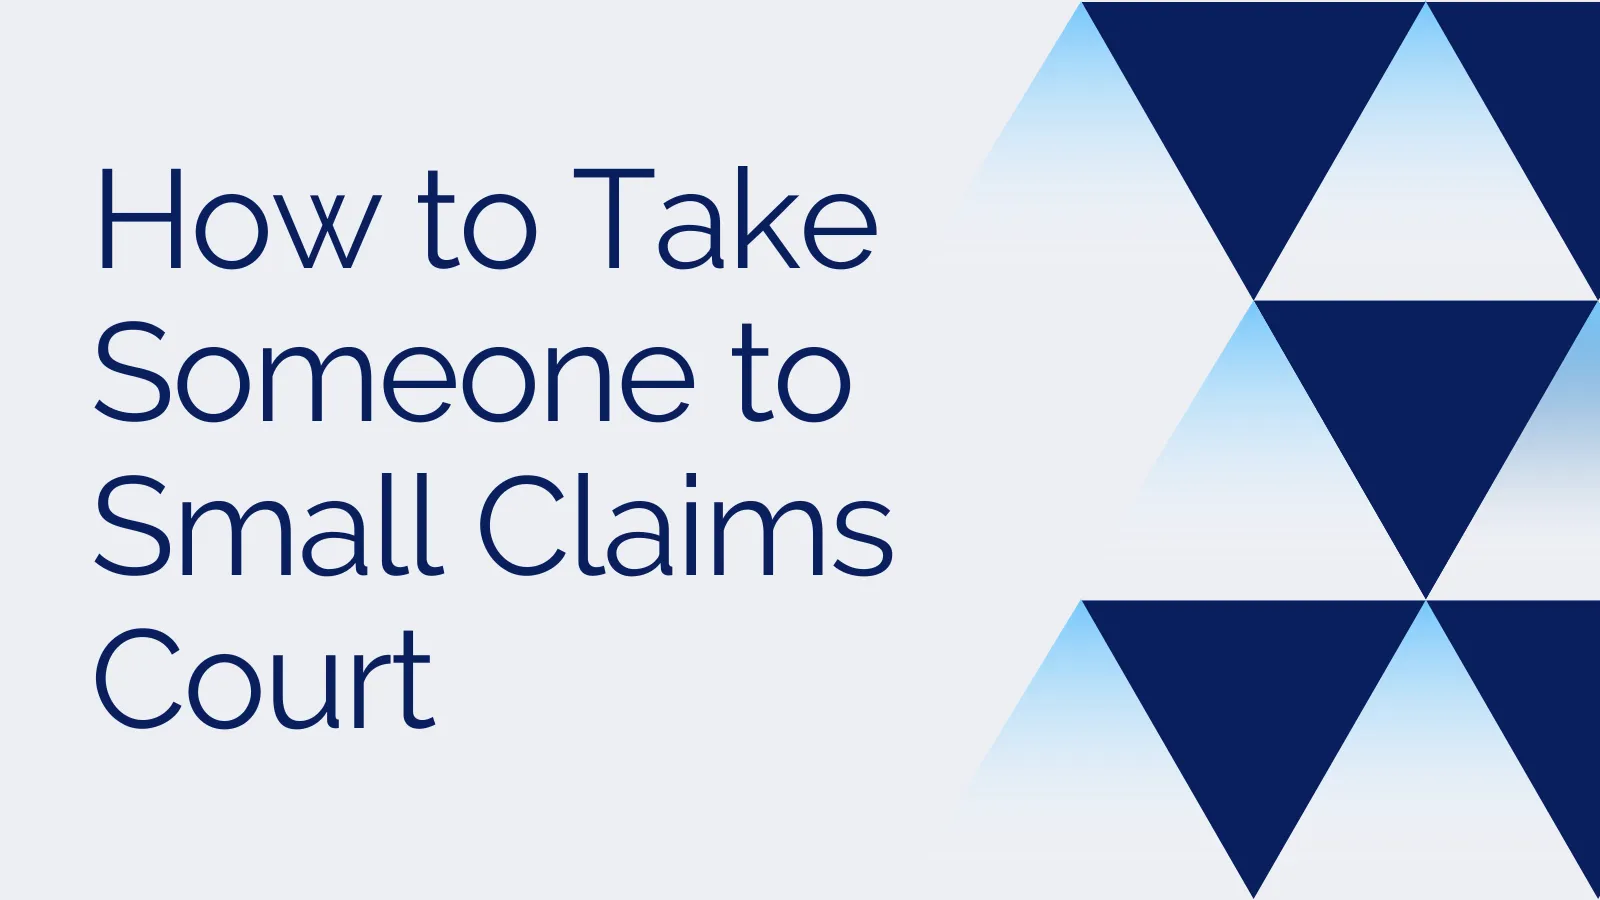 How to Take Someone to Small Claims Court